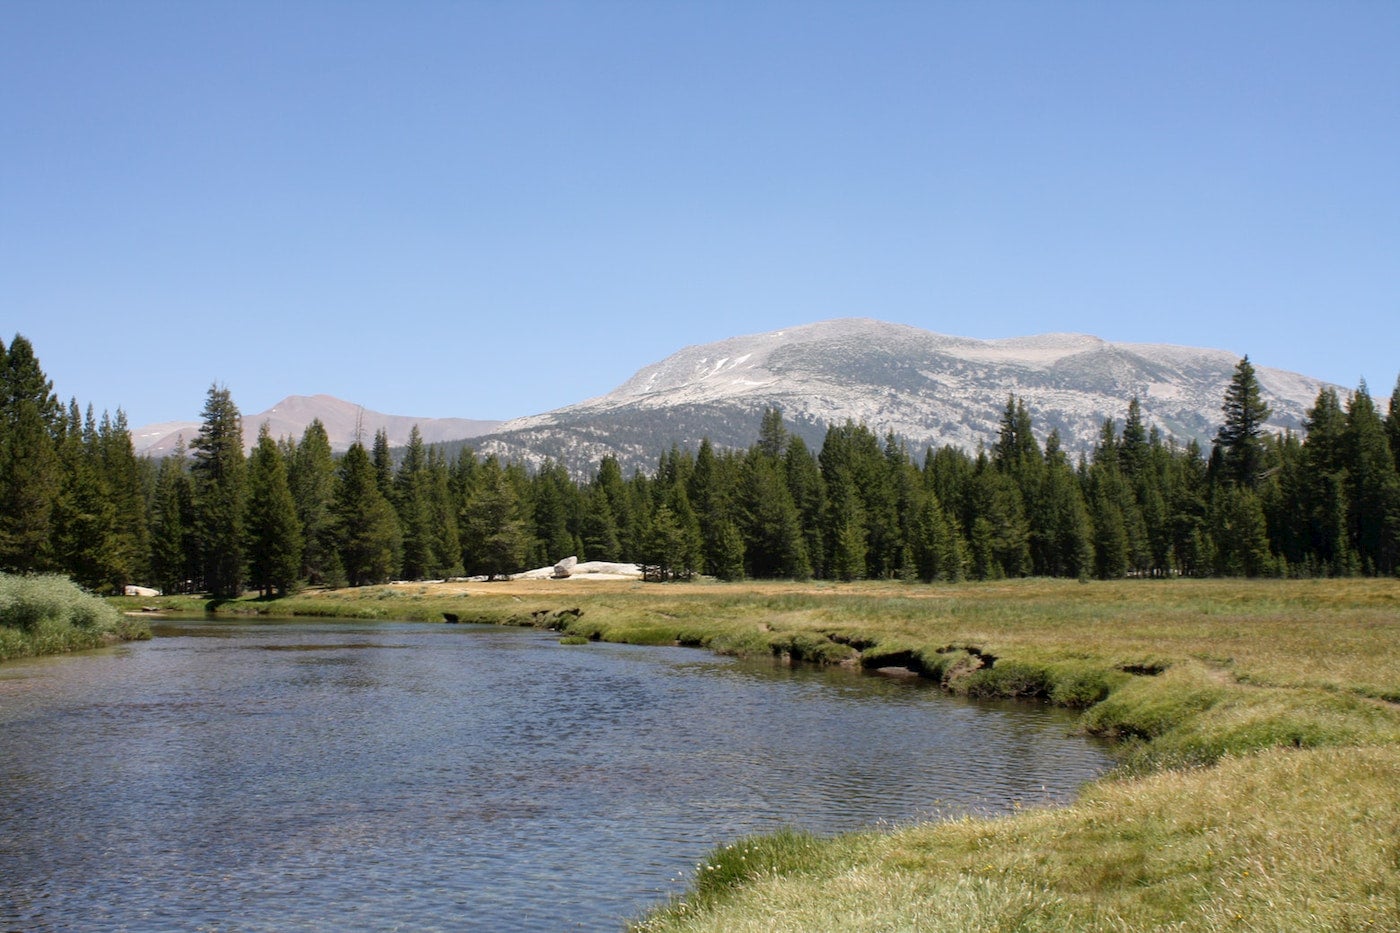 the Tuolumne River in yosemite national park running through the meadow below mountains.